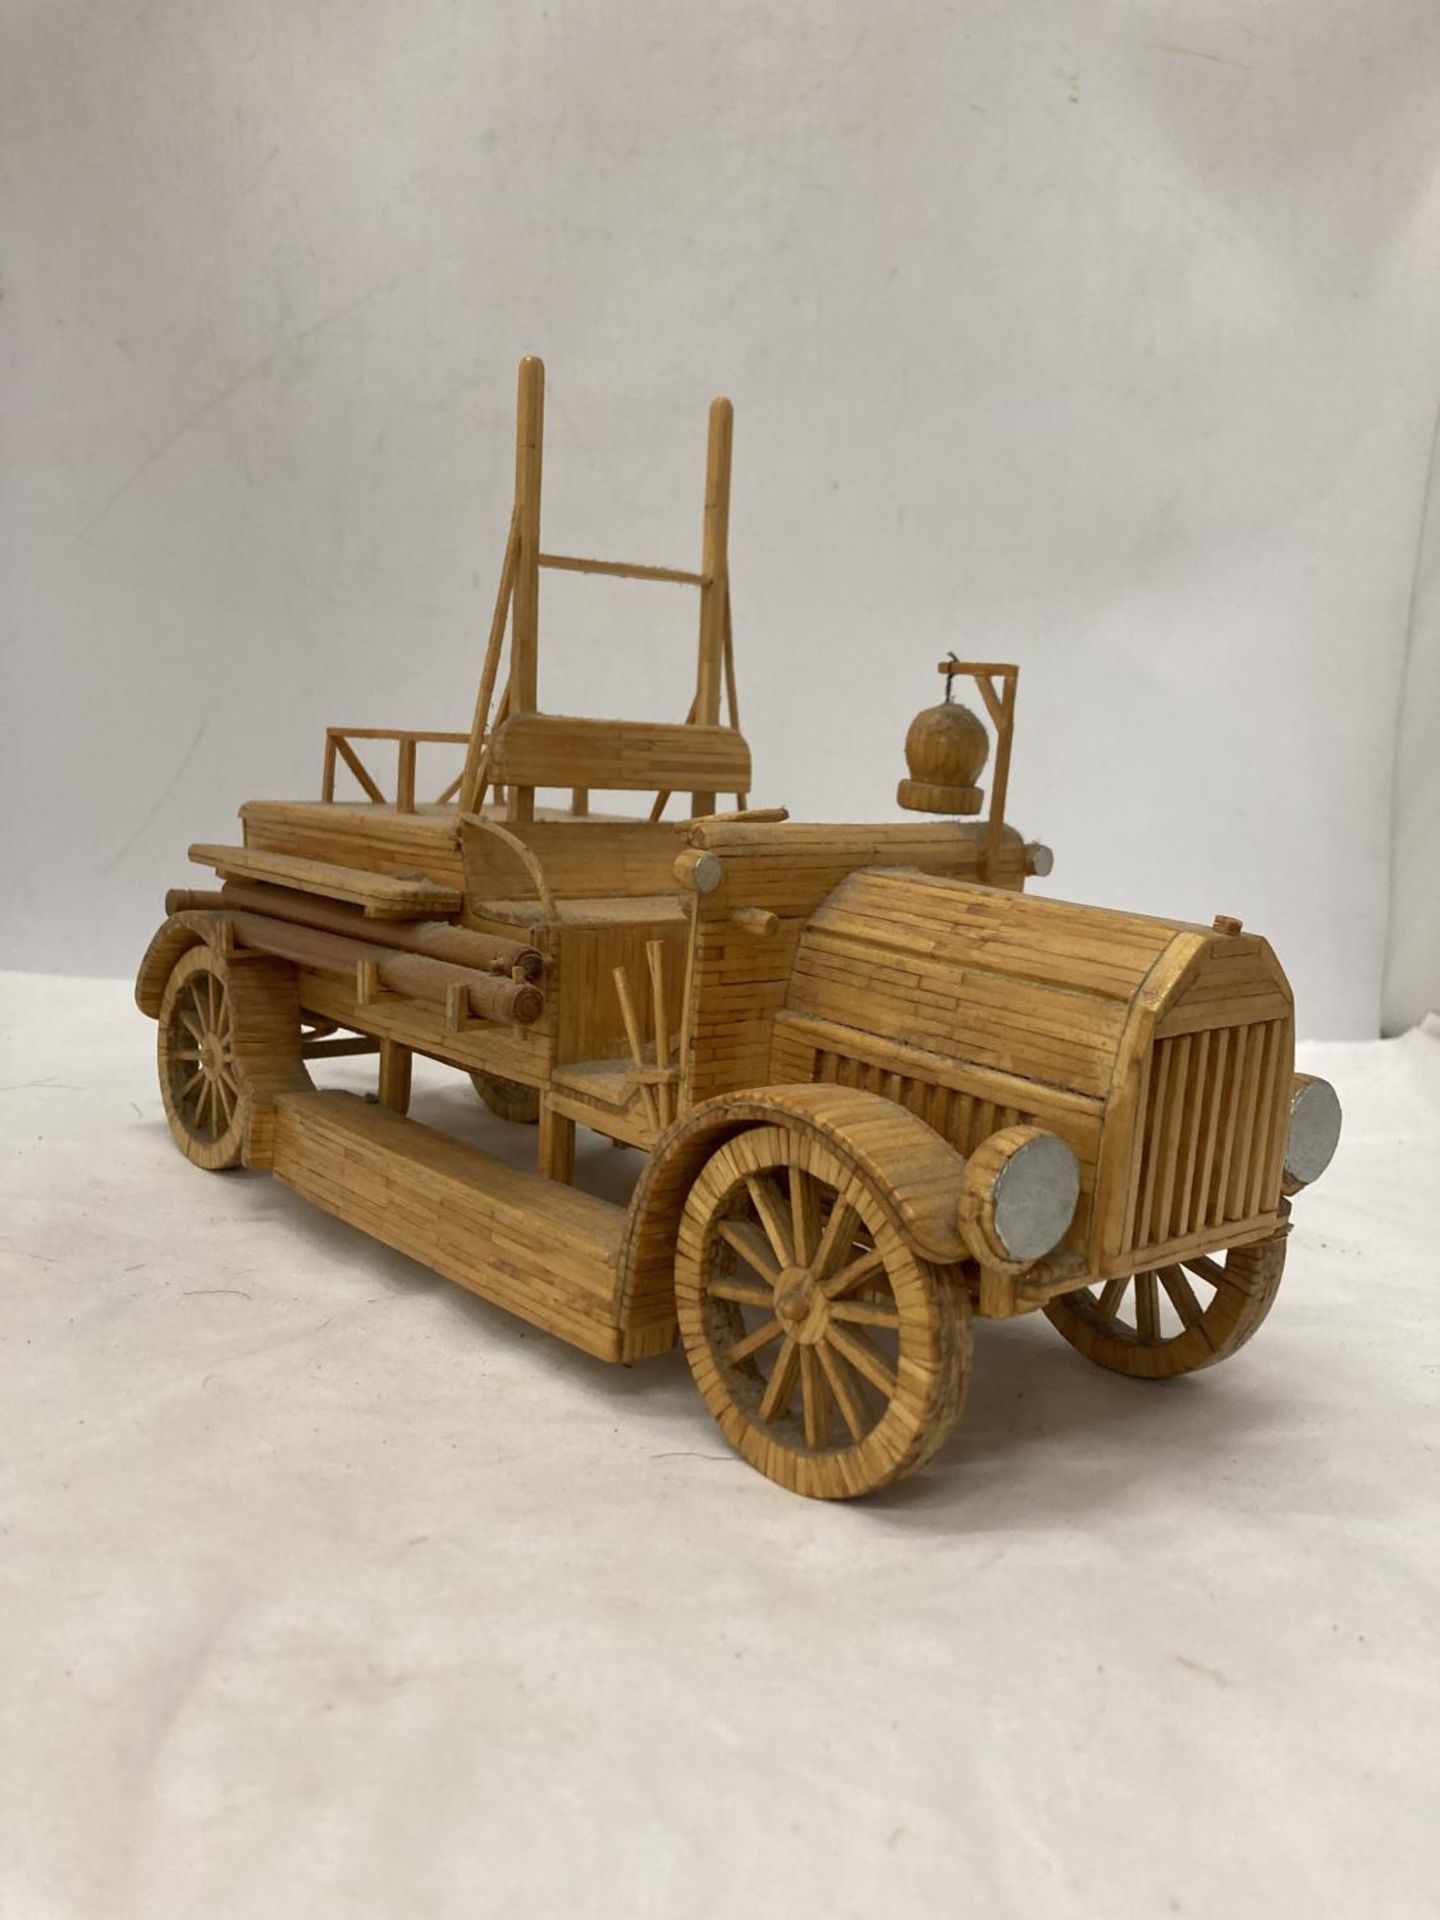 A QUANTITY OF MODELS MADE WITH WOOD AND MATCHSTICKS TO INCLUDE TRAINS, A TRAM, TRUCK, ETC - Image 7 of 7